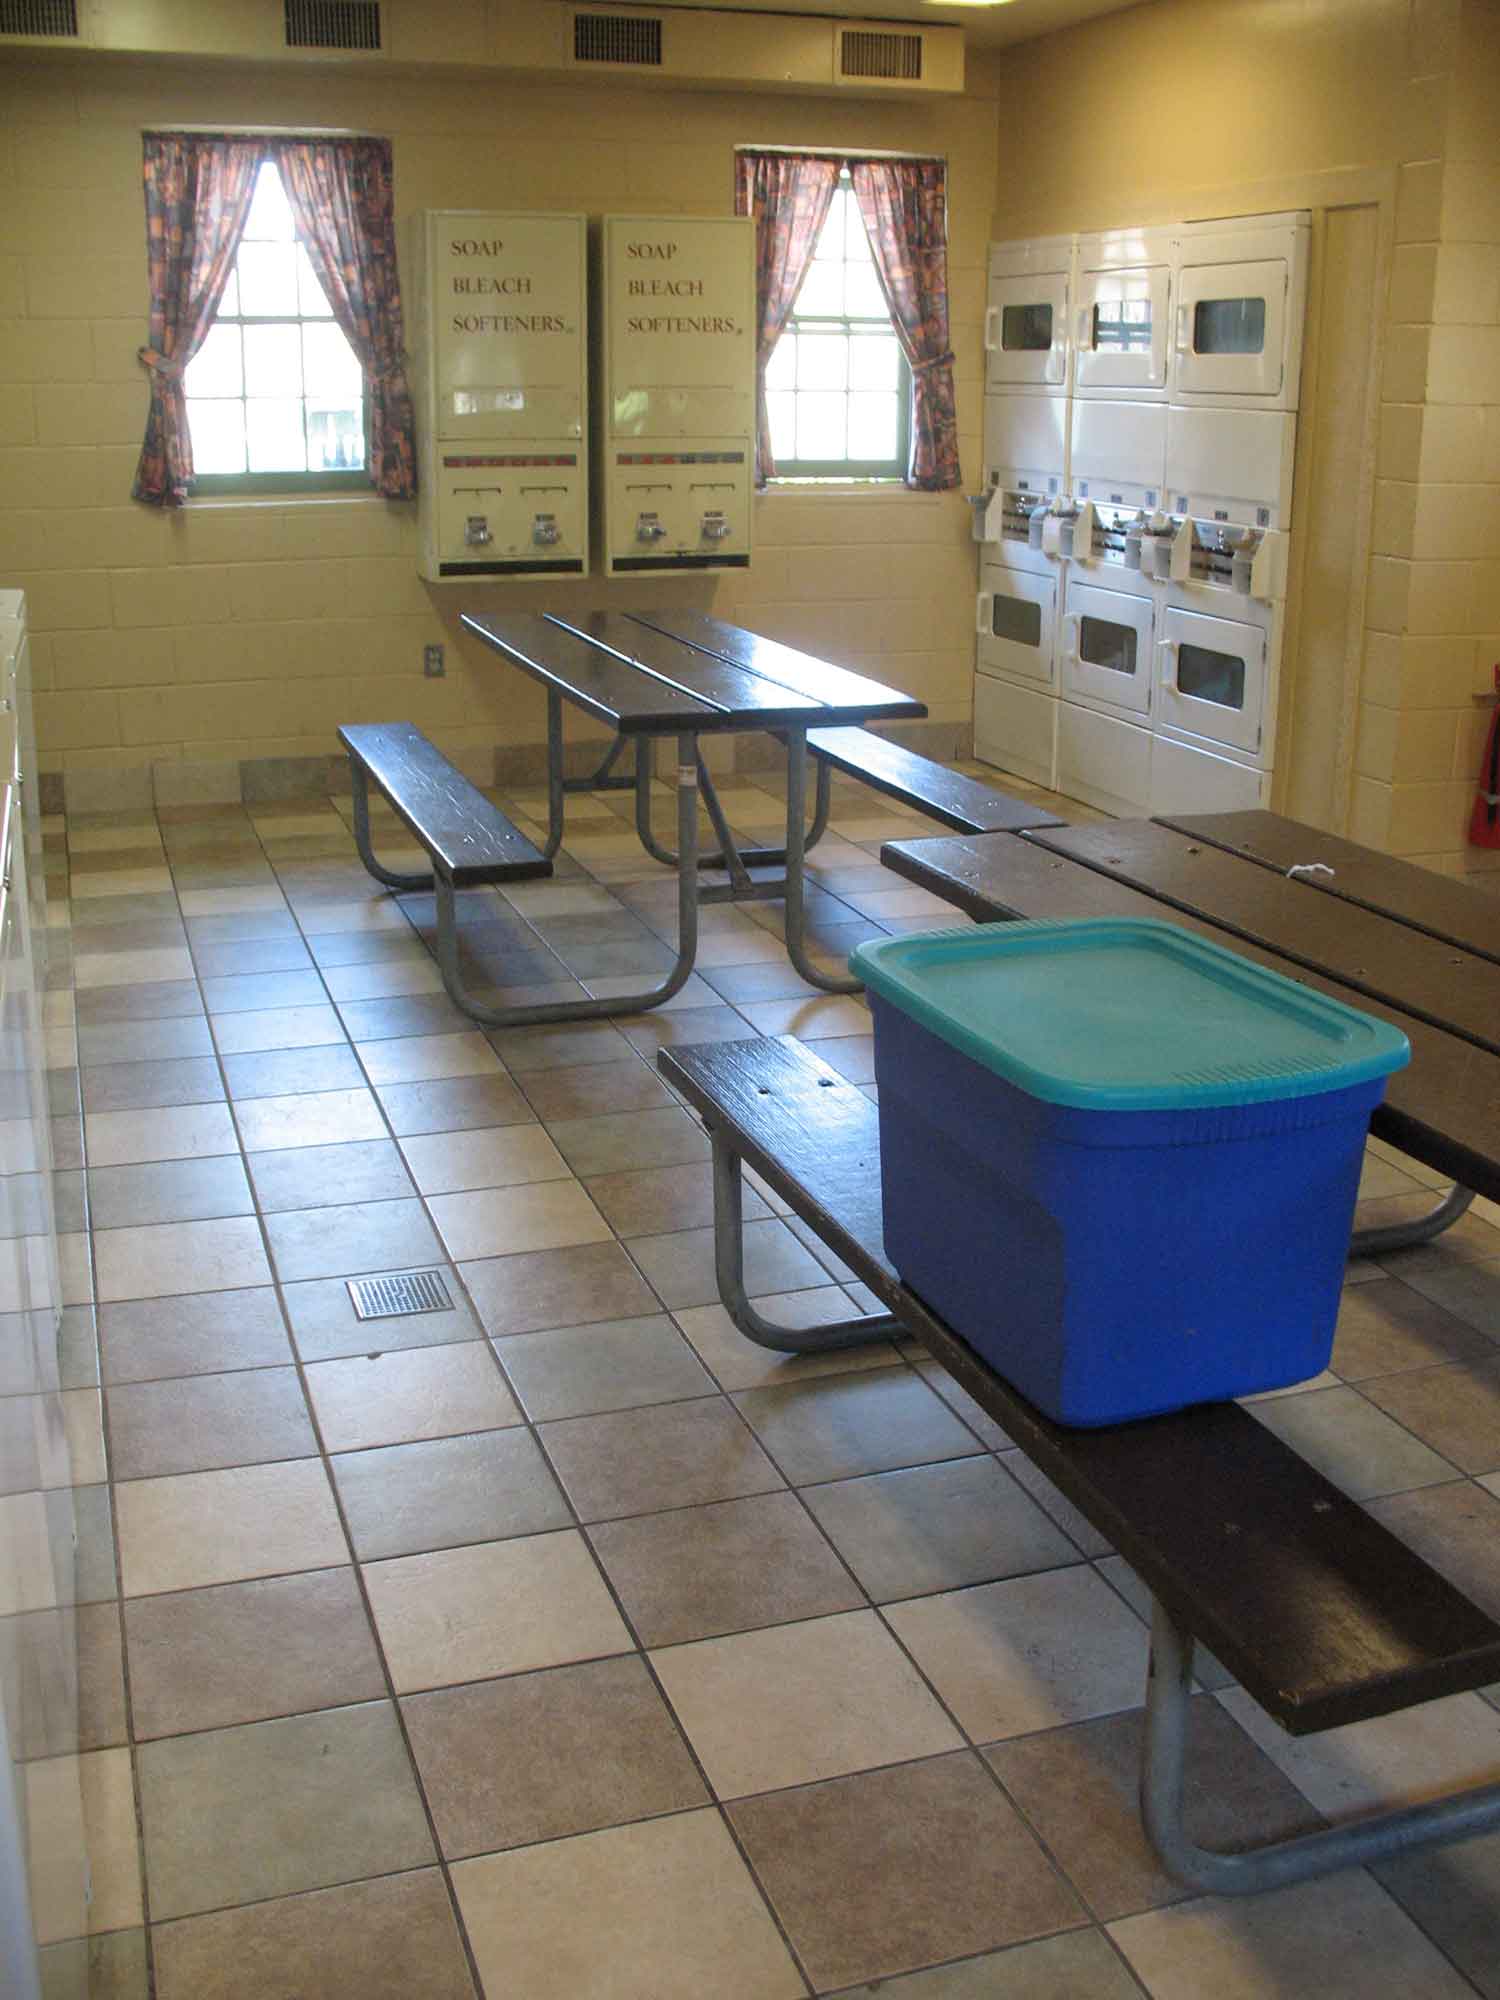 Fort Wilderness - Laundry Room - Benches